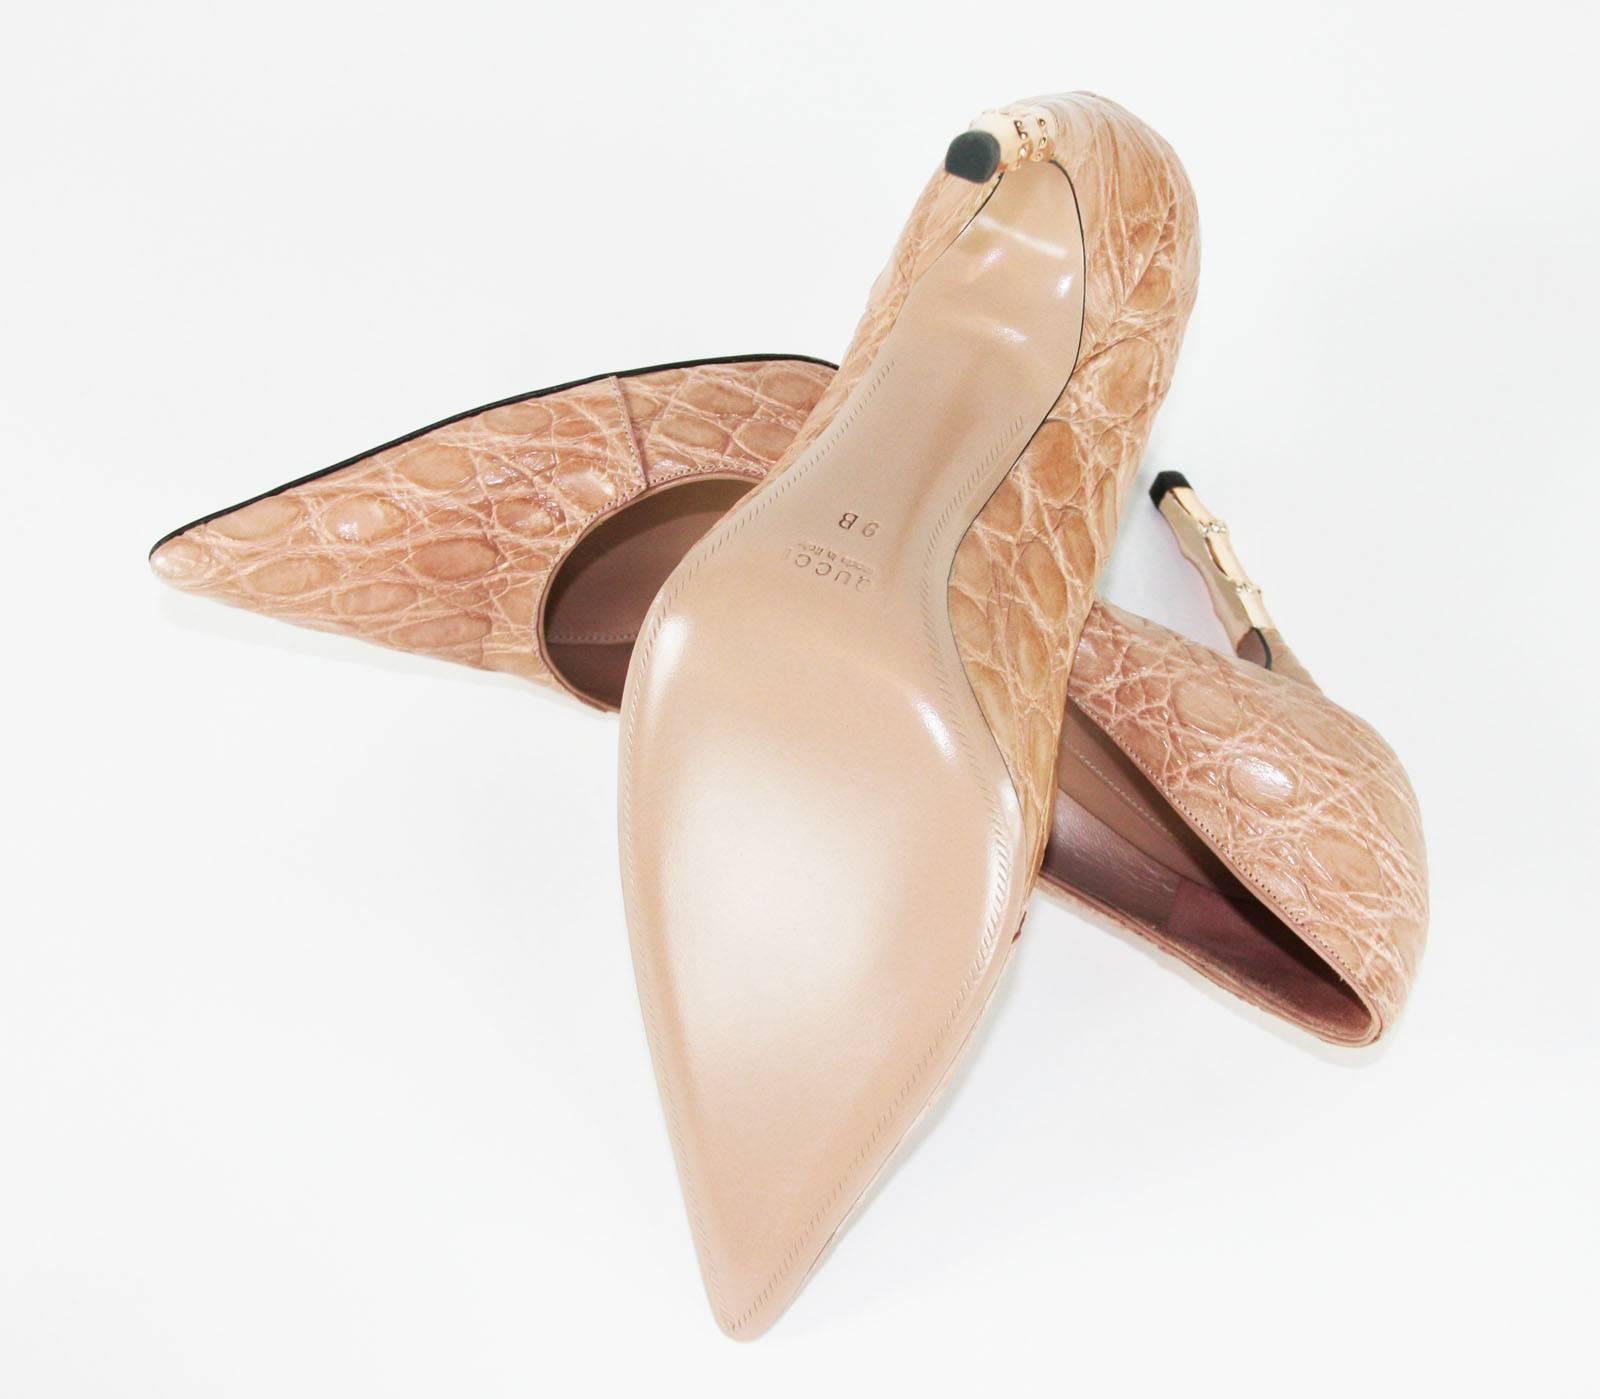 New Tom Ford for Gucci 2004 Collection Crocodile Nude Bamboo Heel Shoes 40 C In New Condition For Sale In Montgomery, TX